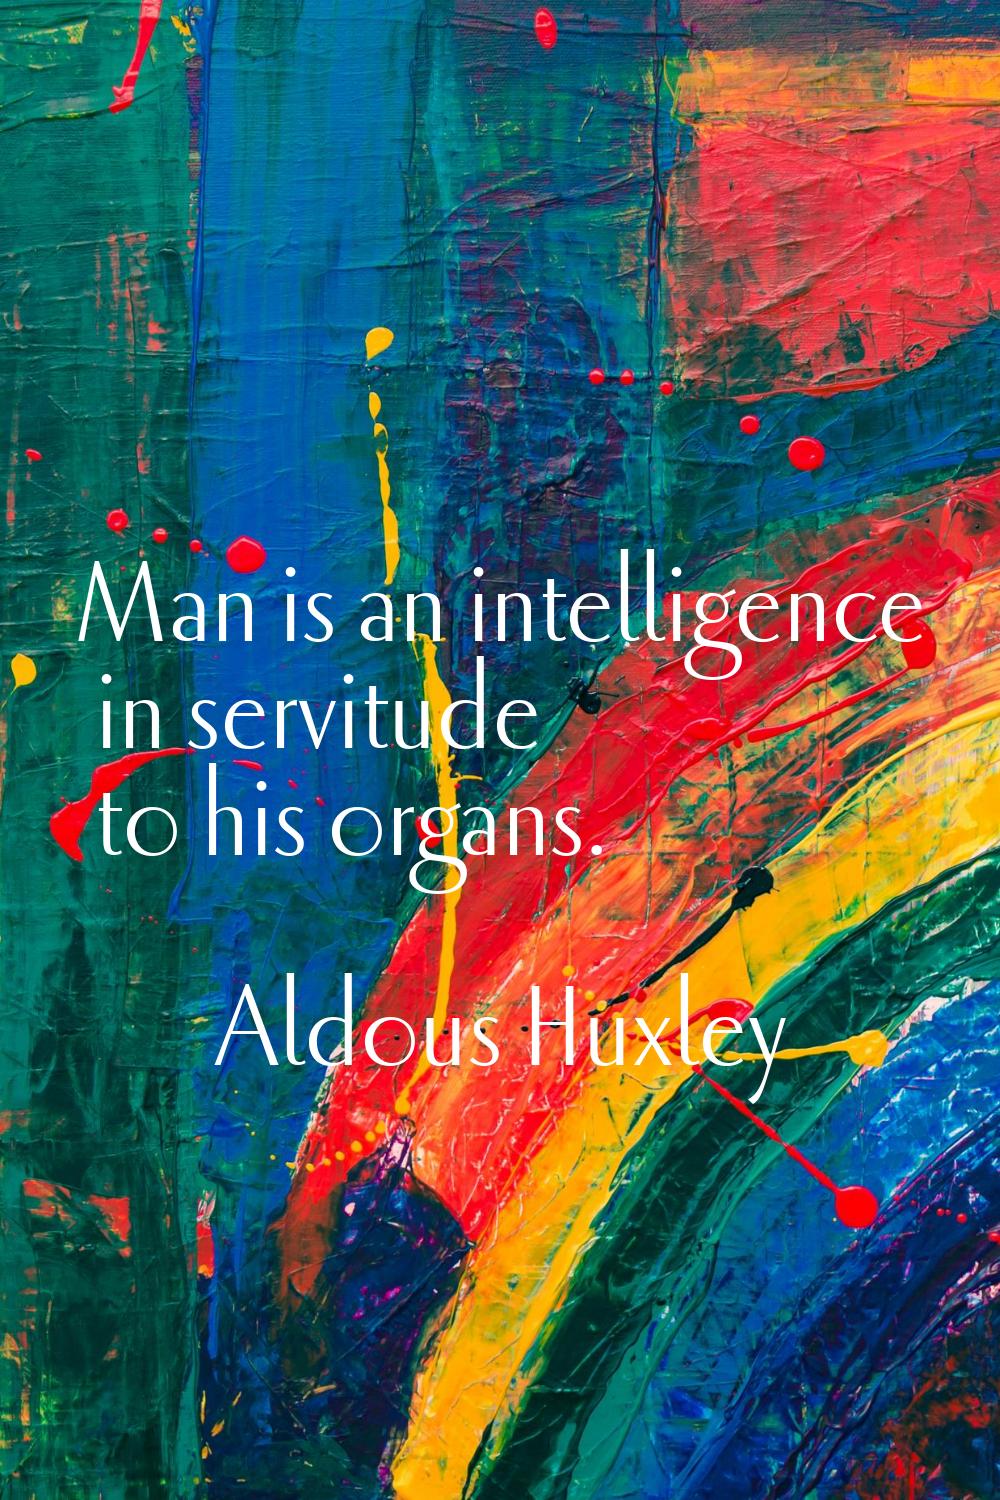 Man is an intelligence in servitude to his organs.